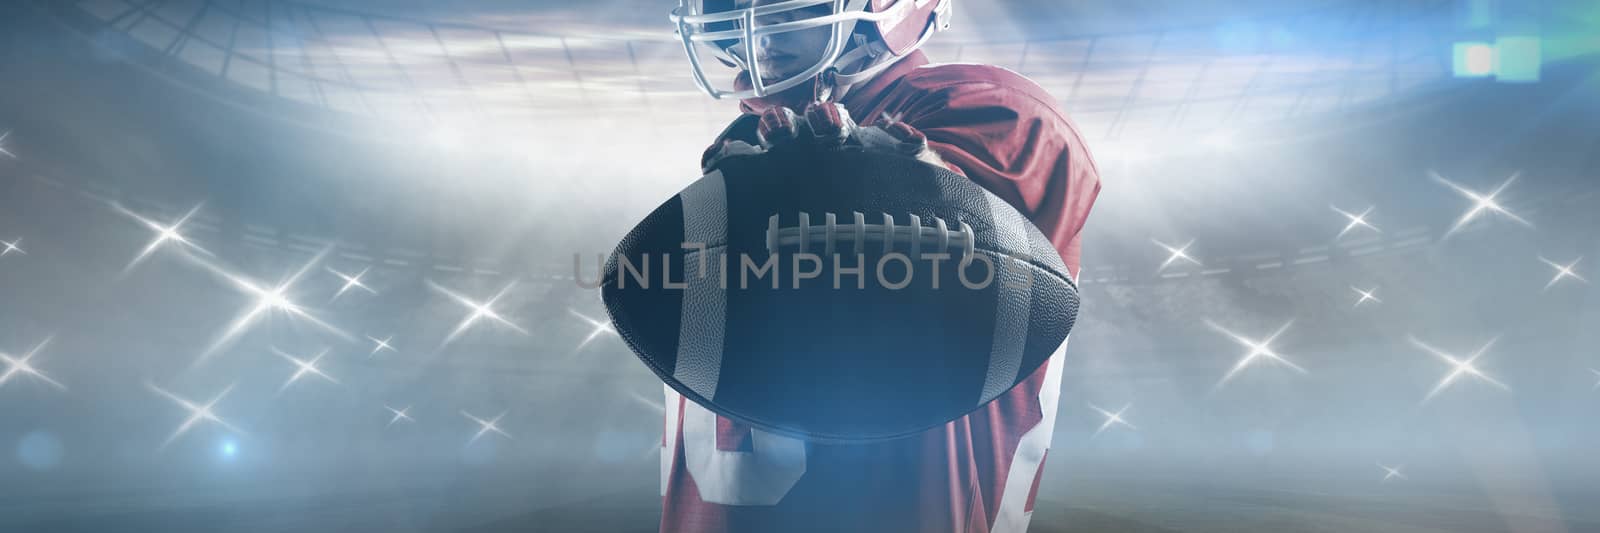 Young American football player standing in rugby helmet and holding rugby ball